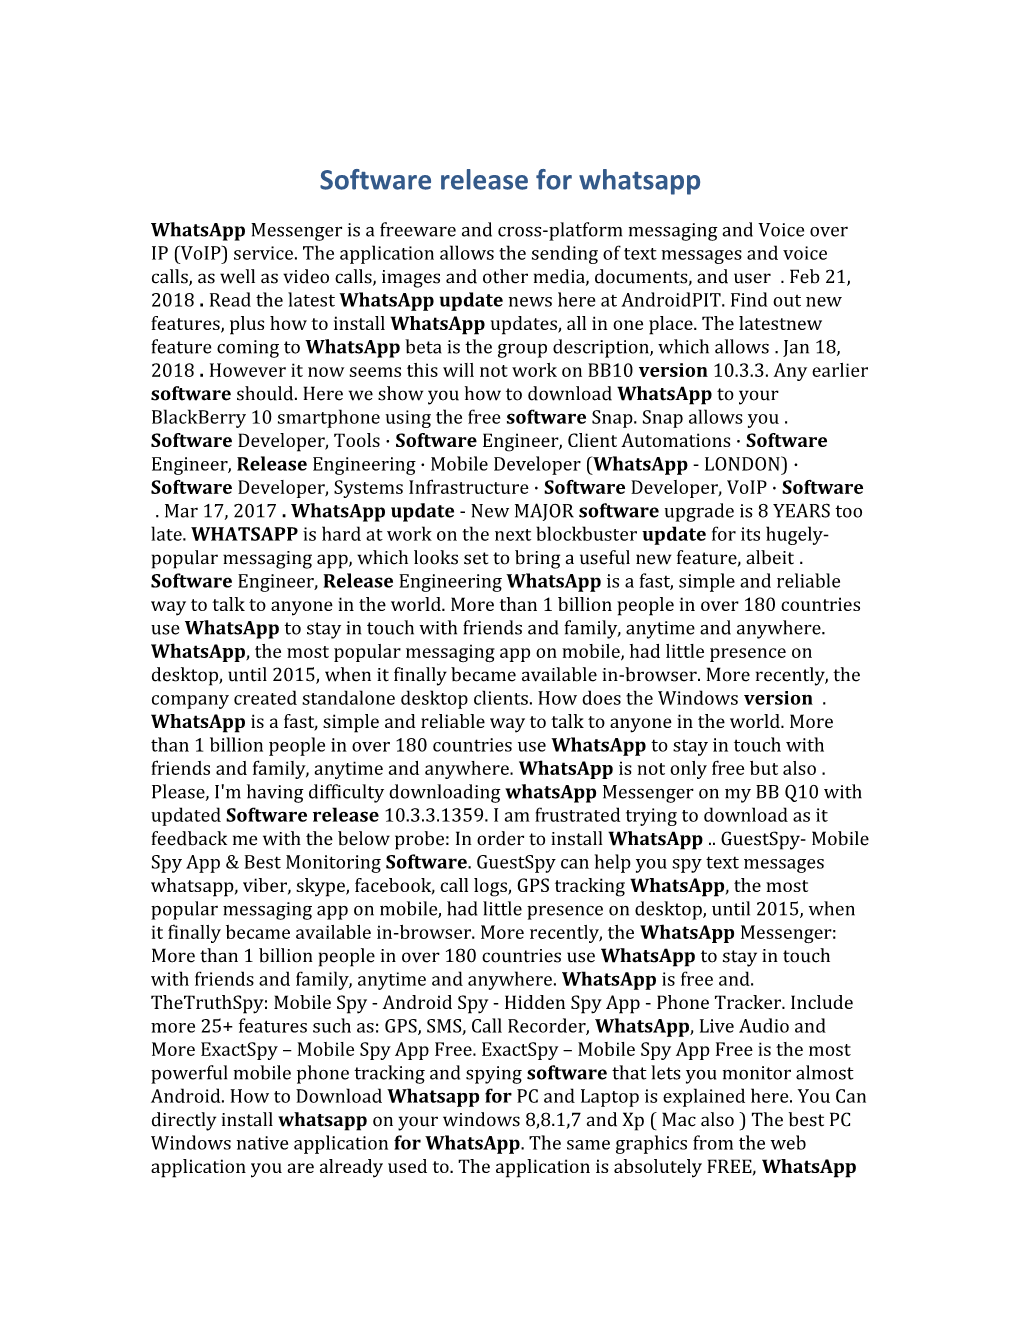 Software Release for Whatsapp